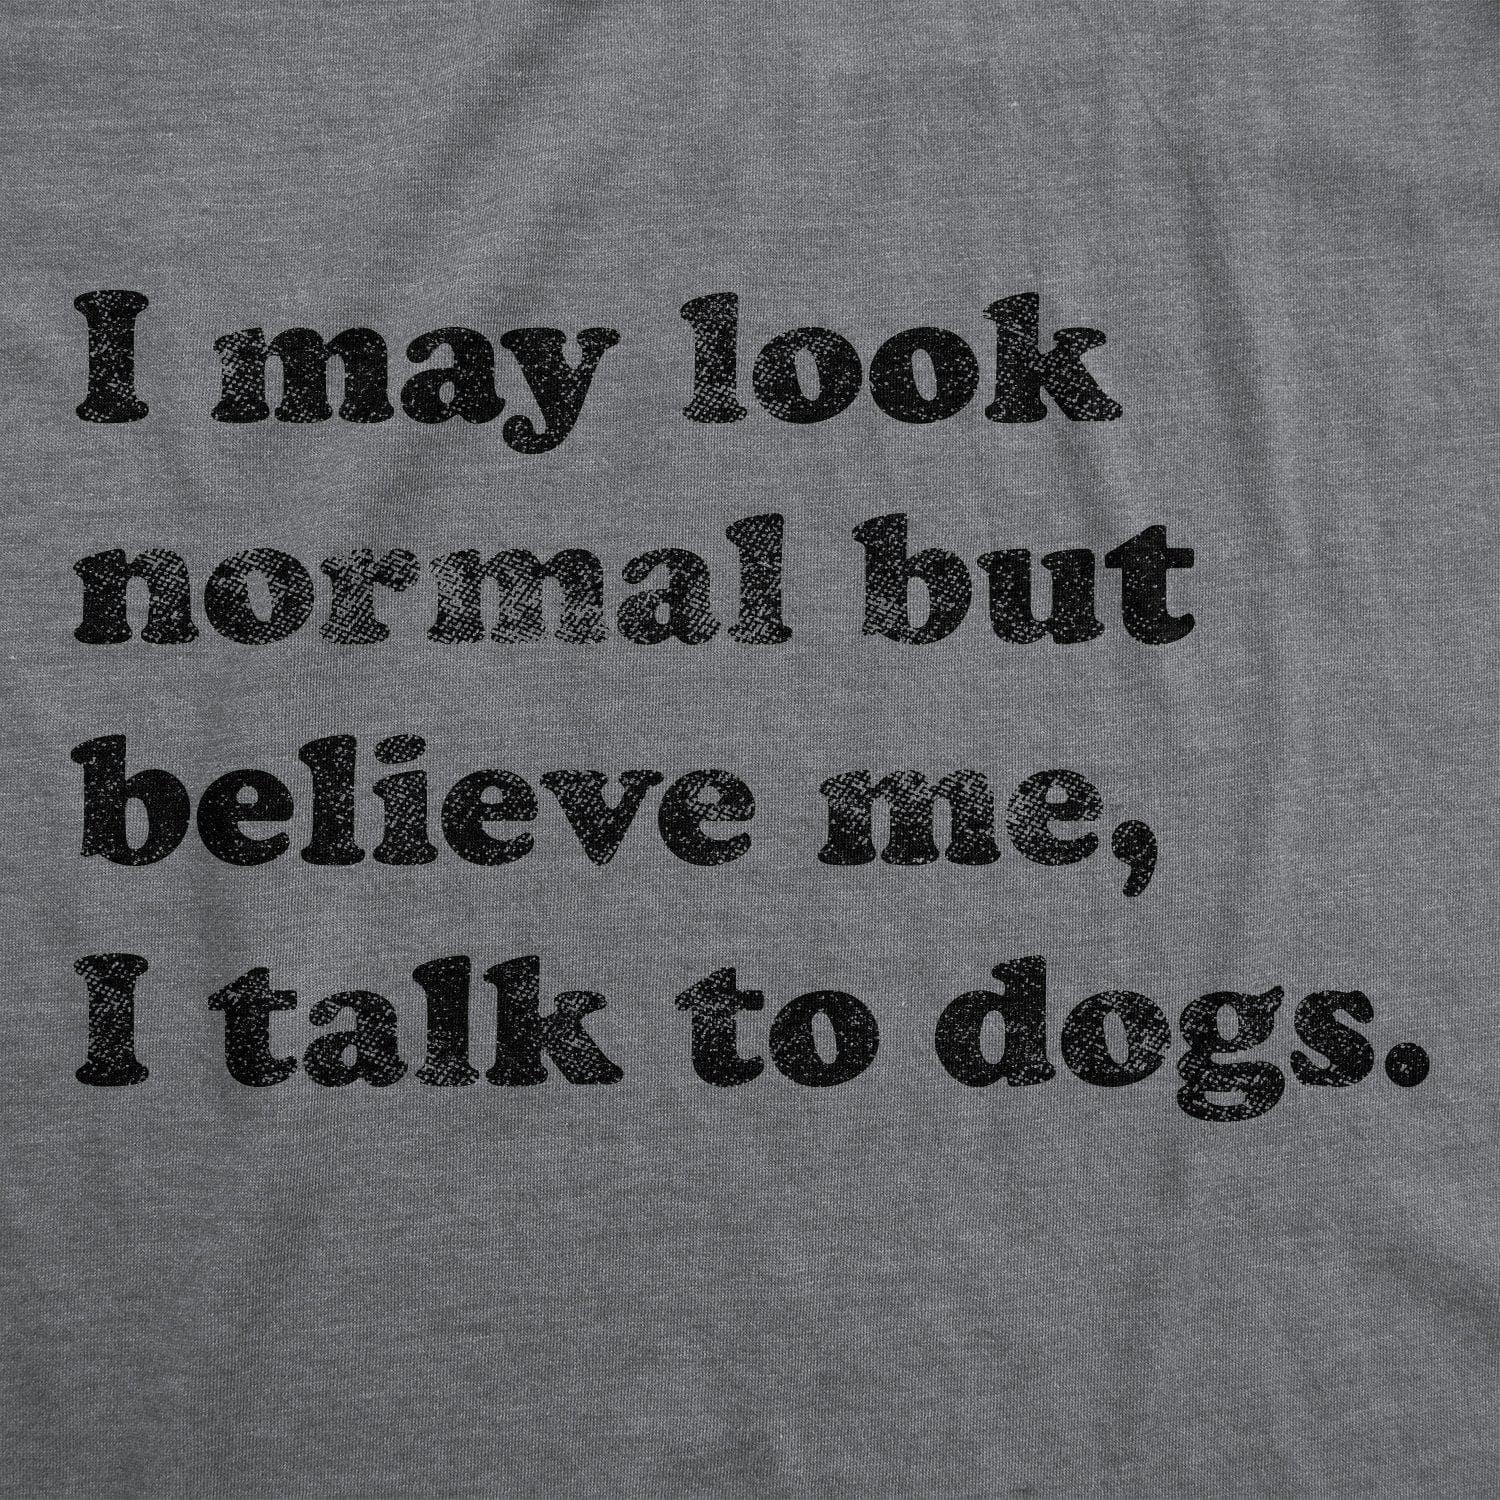 Believe Me I Talk To Dogs Women's Tshirt - Crazy Dog T-Shirts